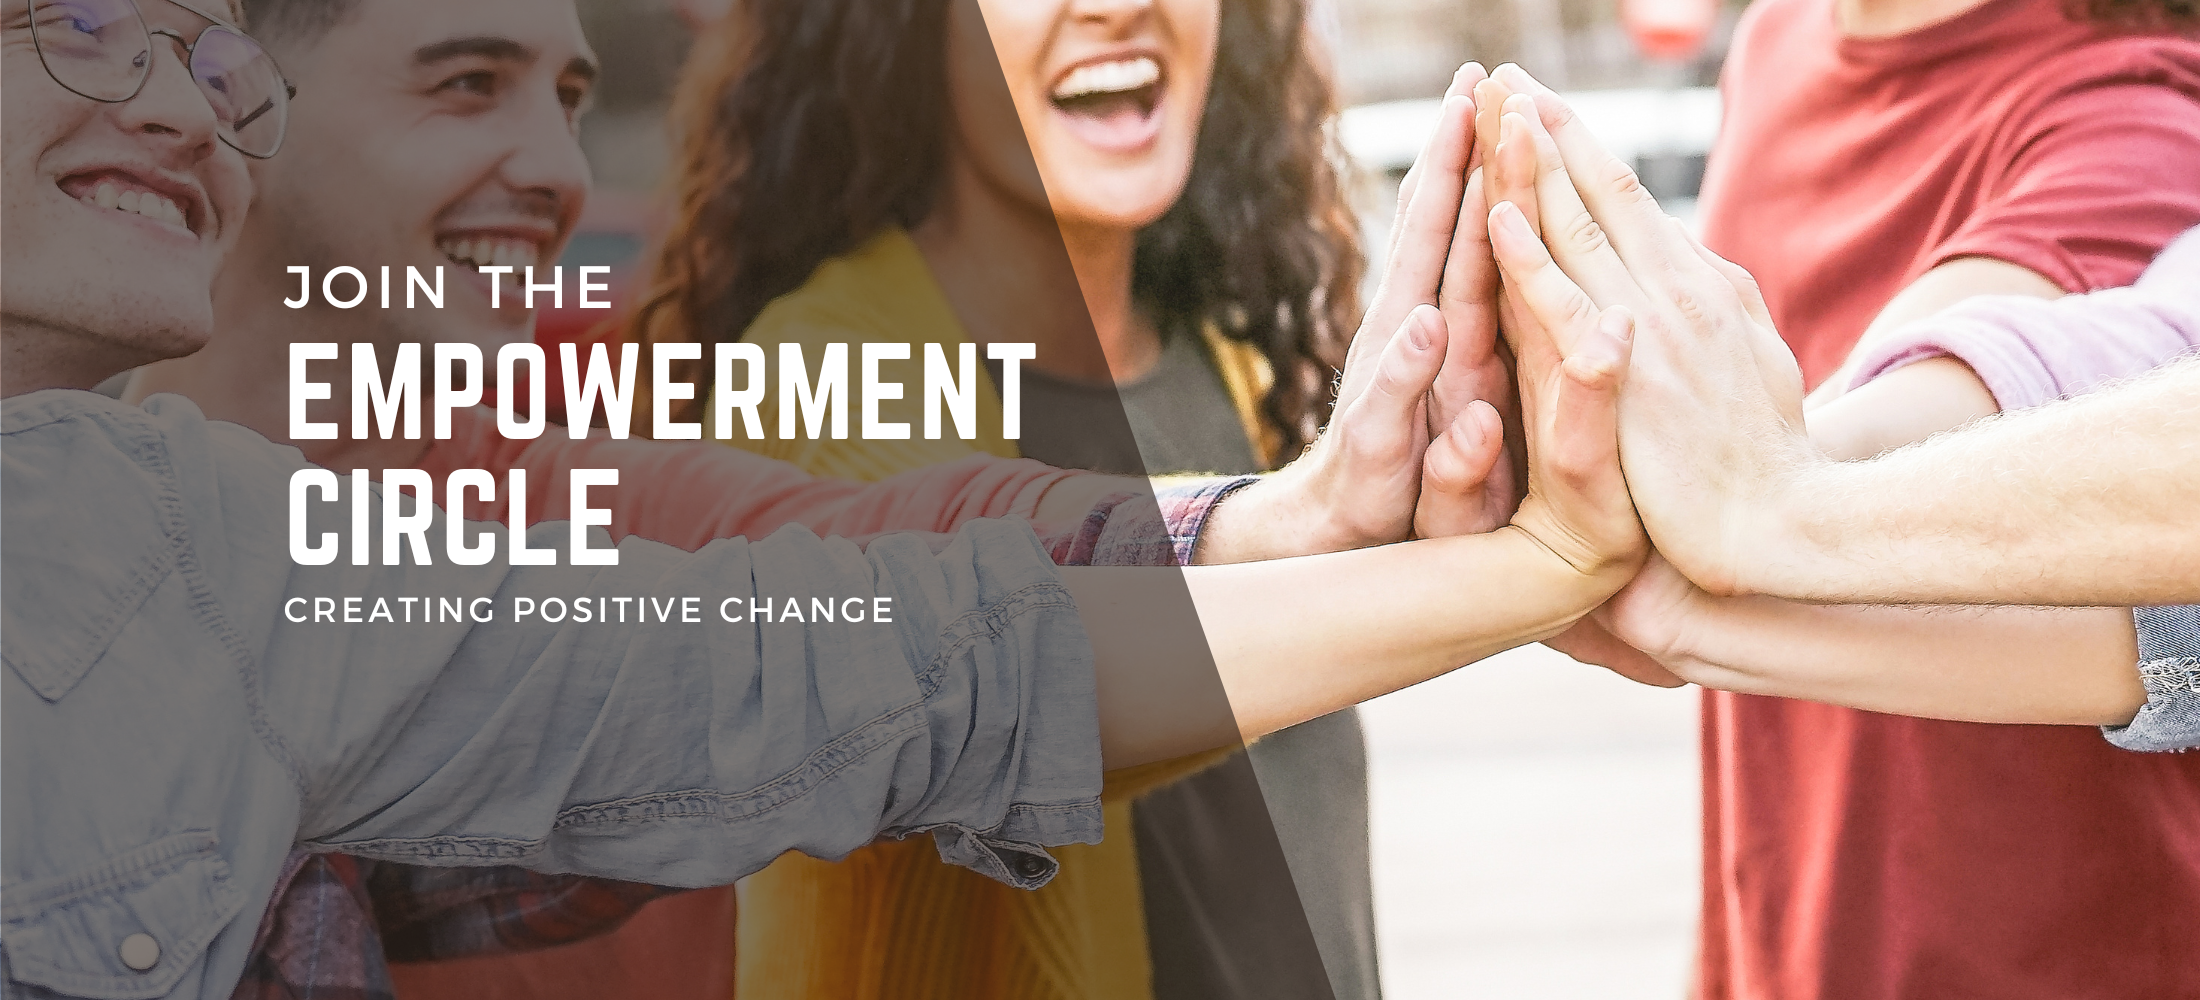 A group of young people giving a group high-five. Overlayed, it says, "Join the Empowerment Circle. Creating Positive Change."